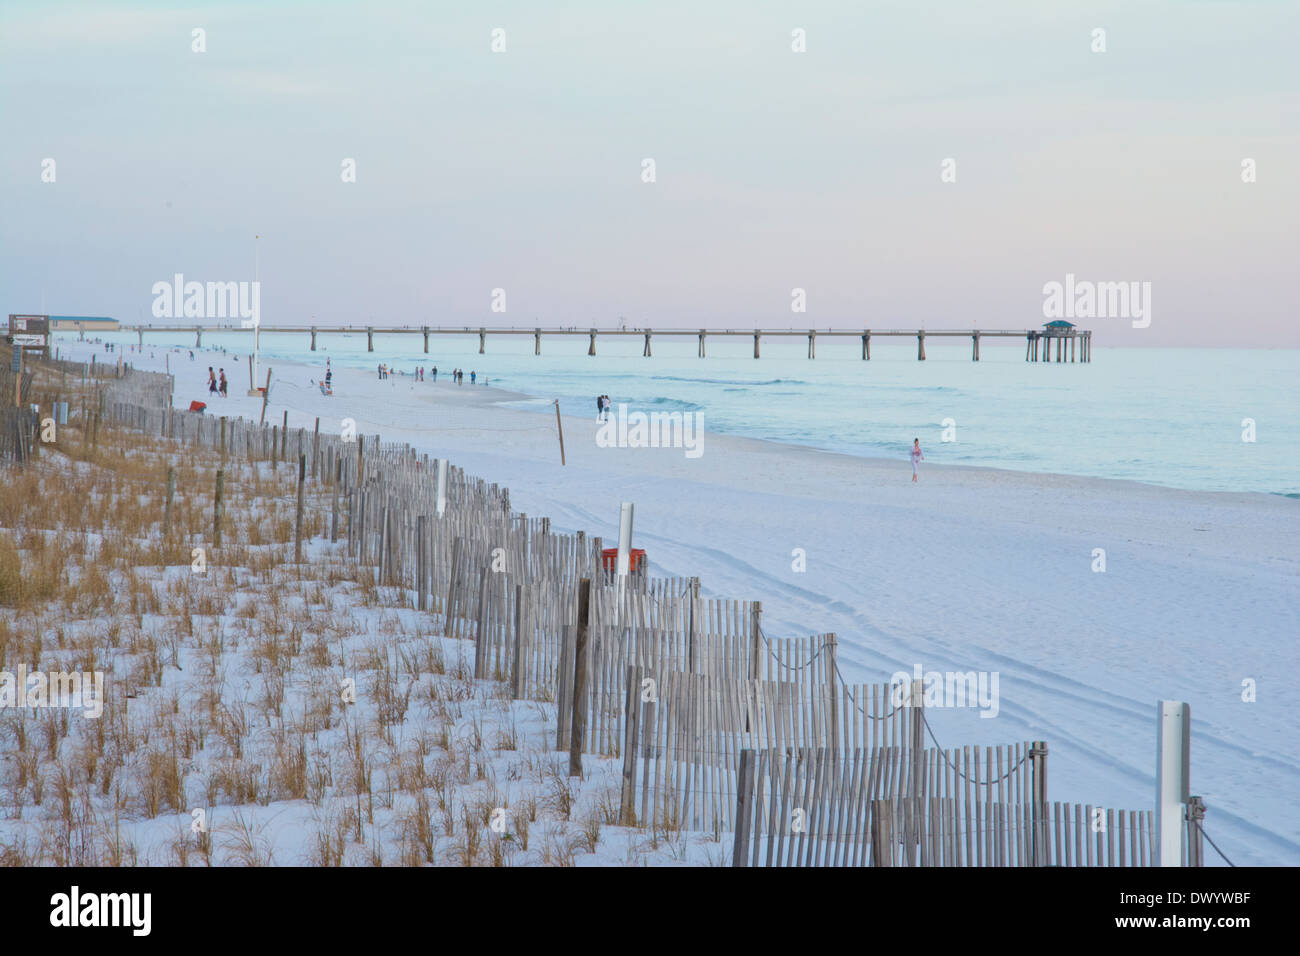 A view of the beach at Okaloosa Island at sunset. Stock Photo